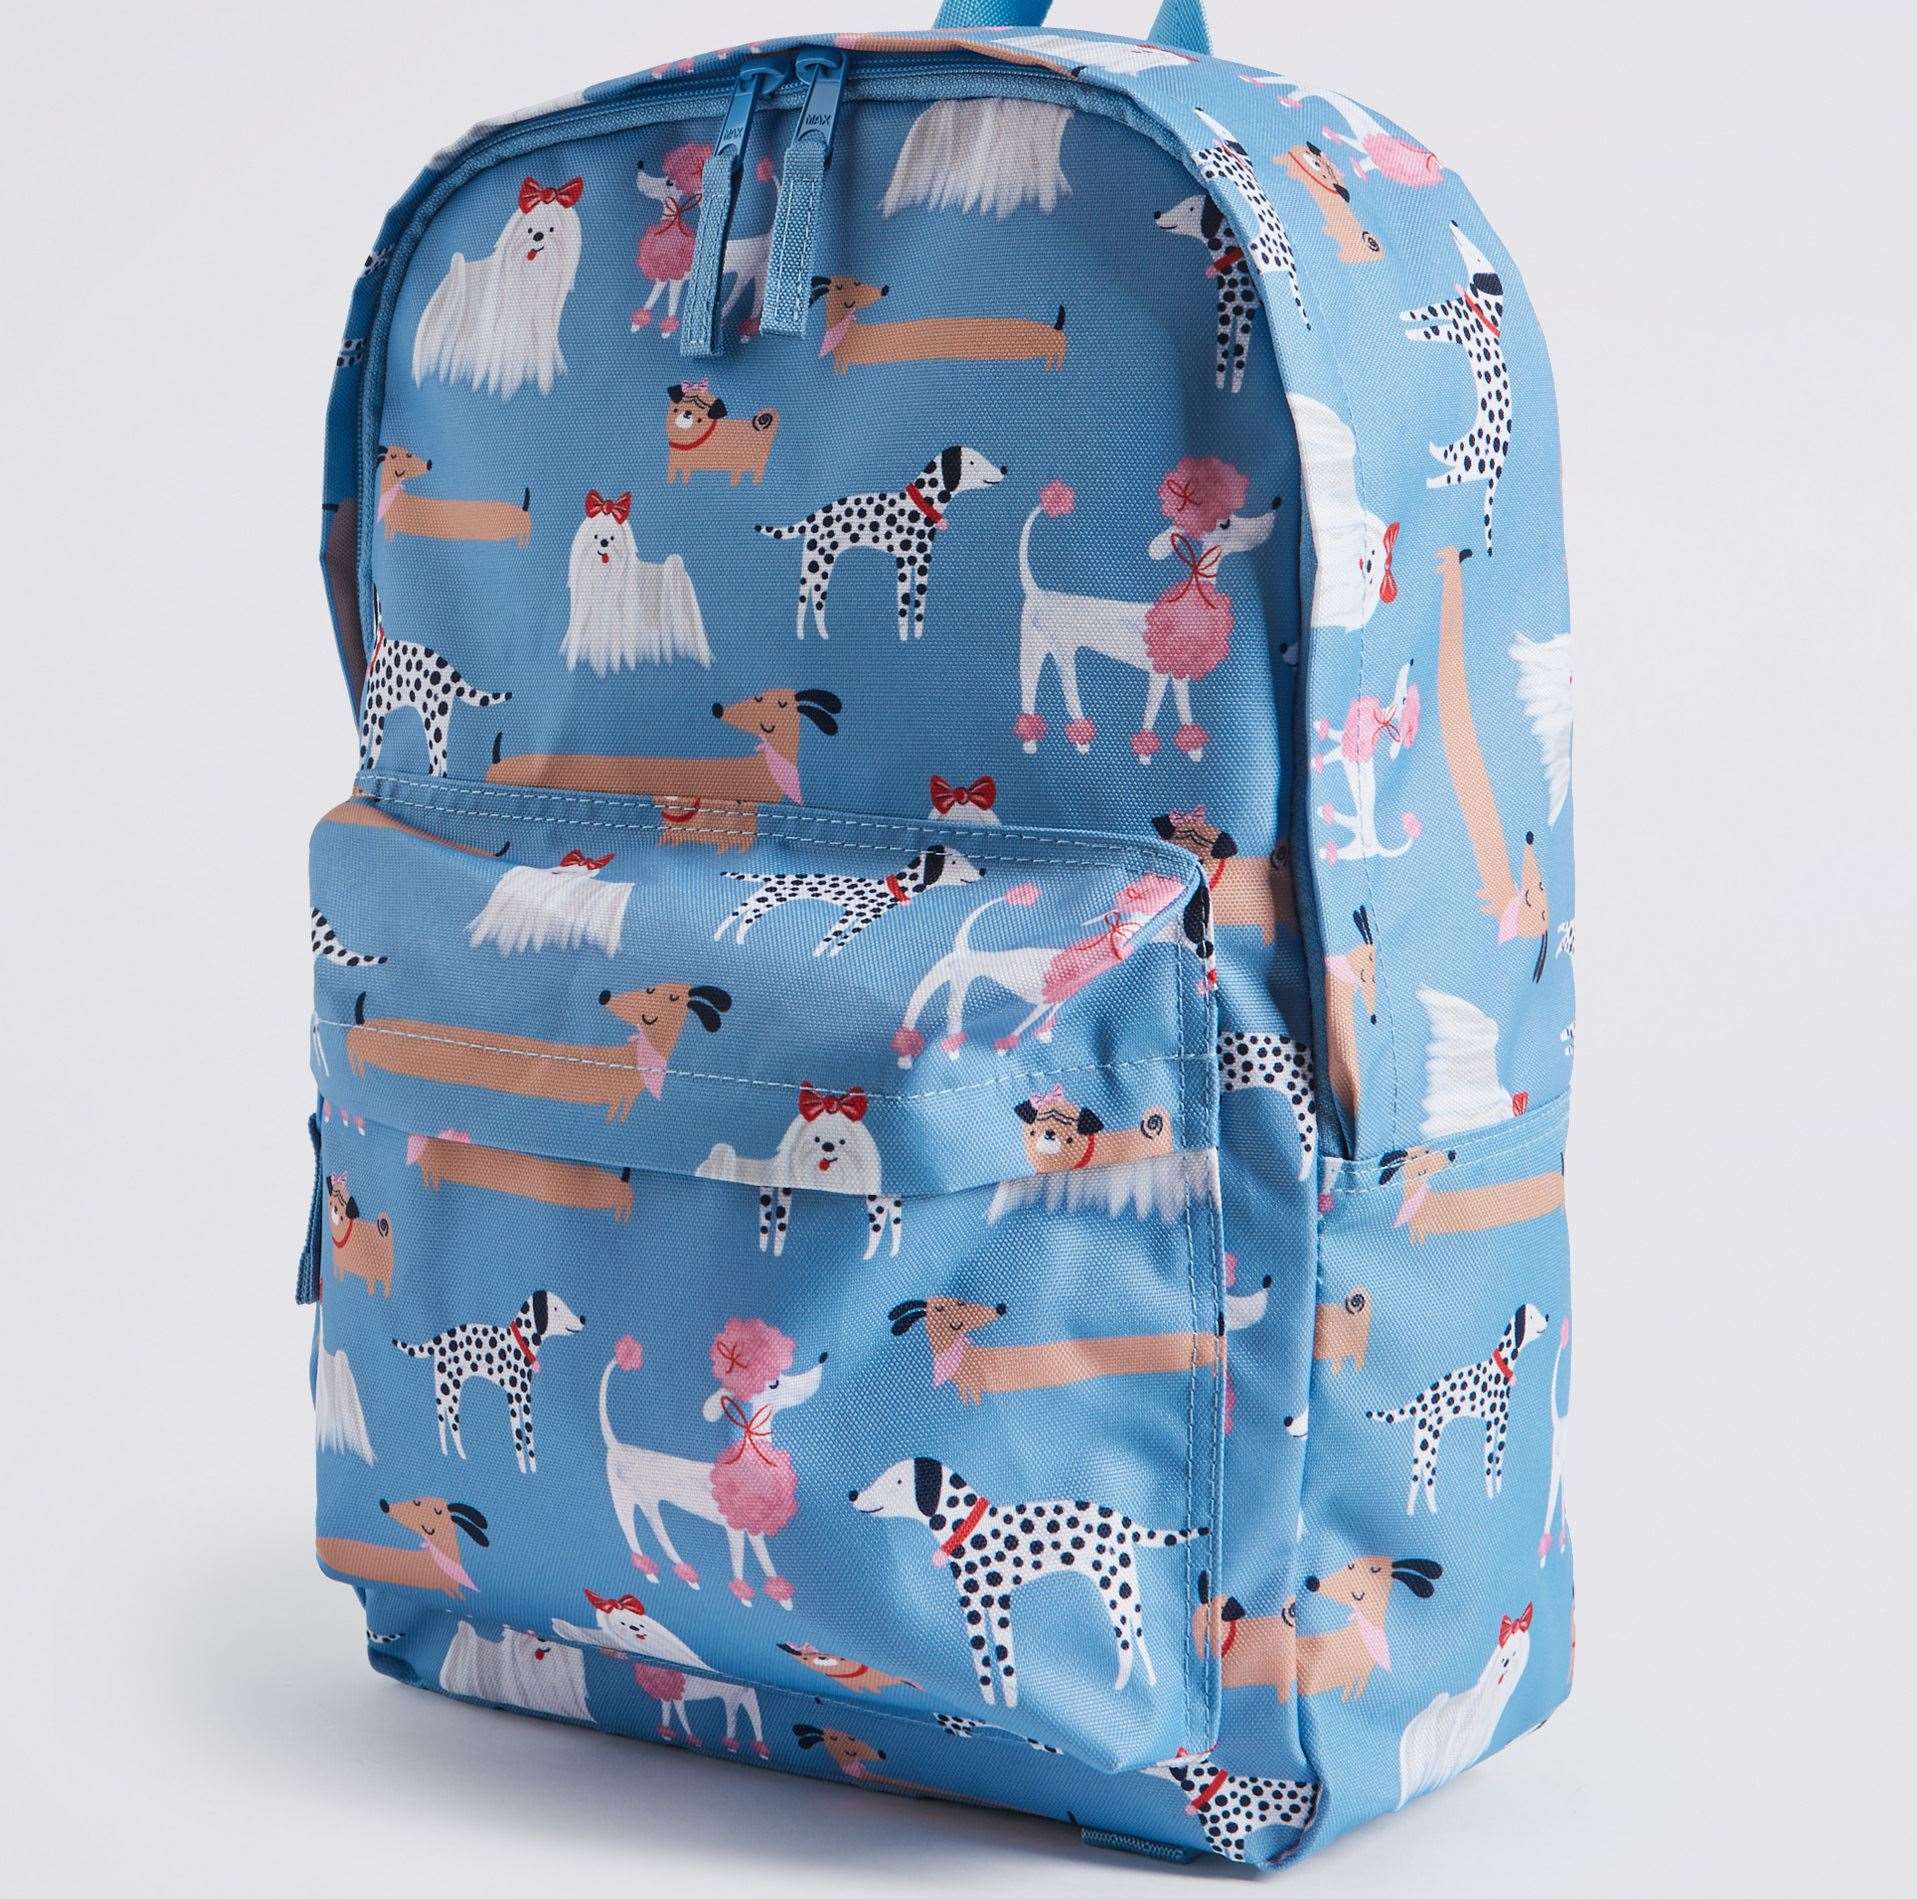 Dog patterned water repellent back pack, £20 from M&S